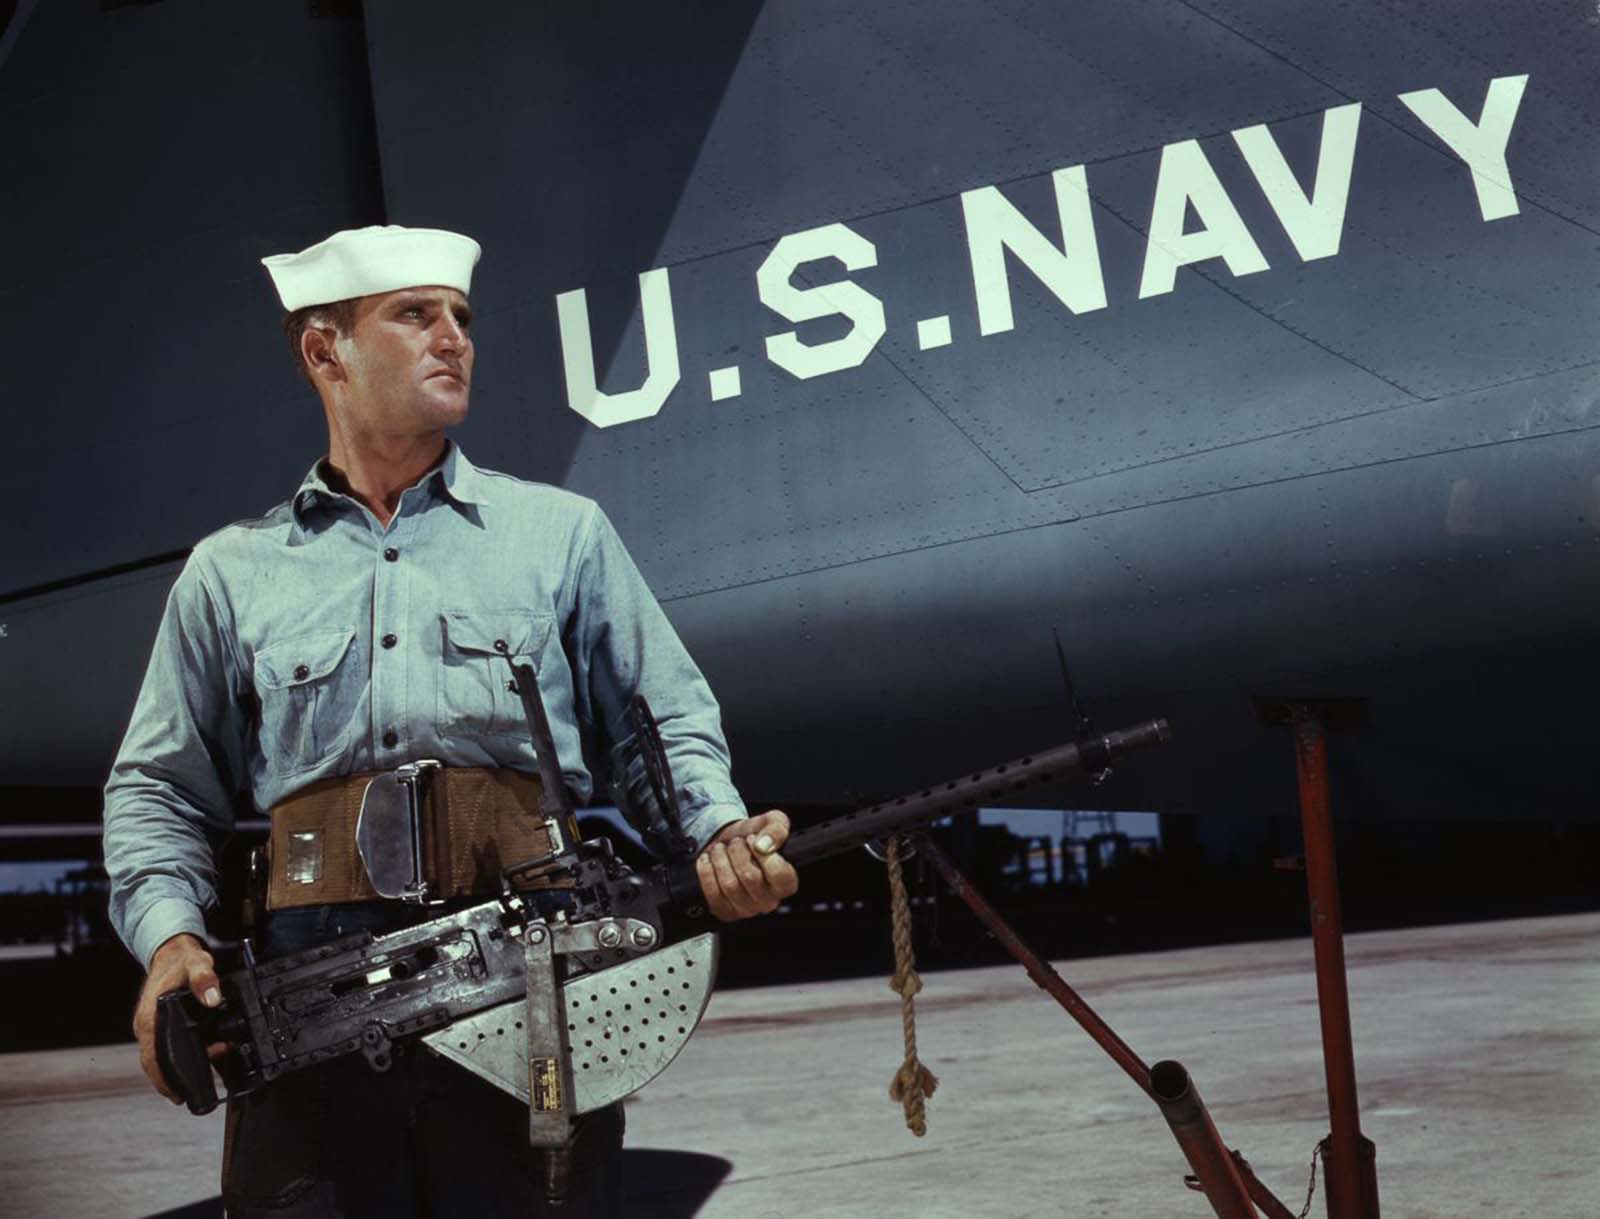 J.D. Estes, a seven-year veteran of the Navy, hefts a machine gun to be installed in a plane.